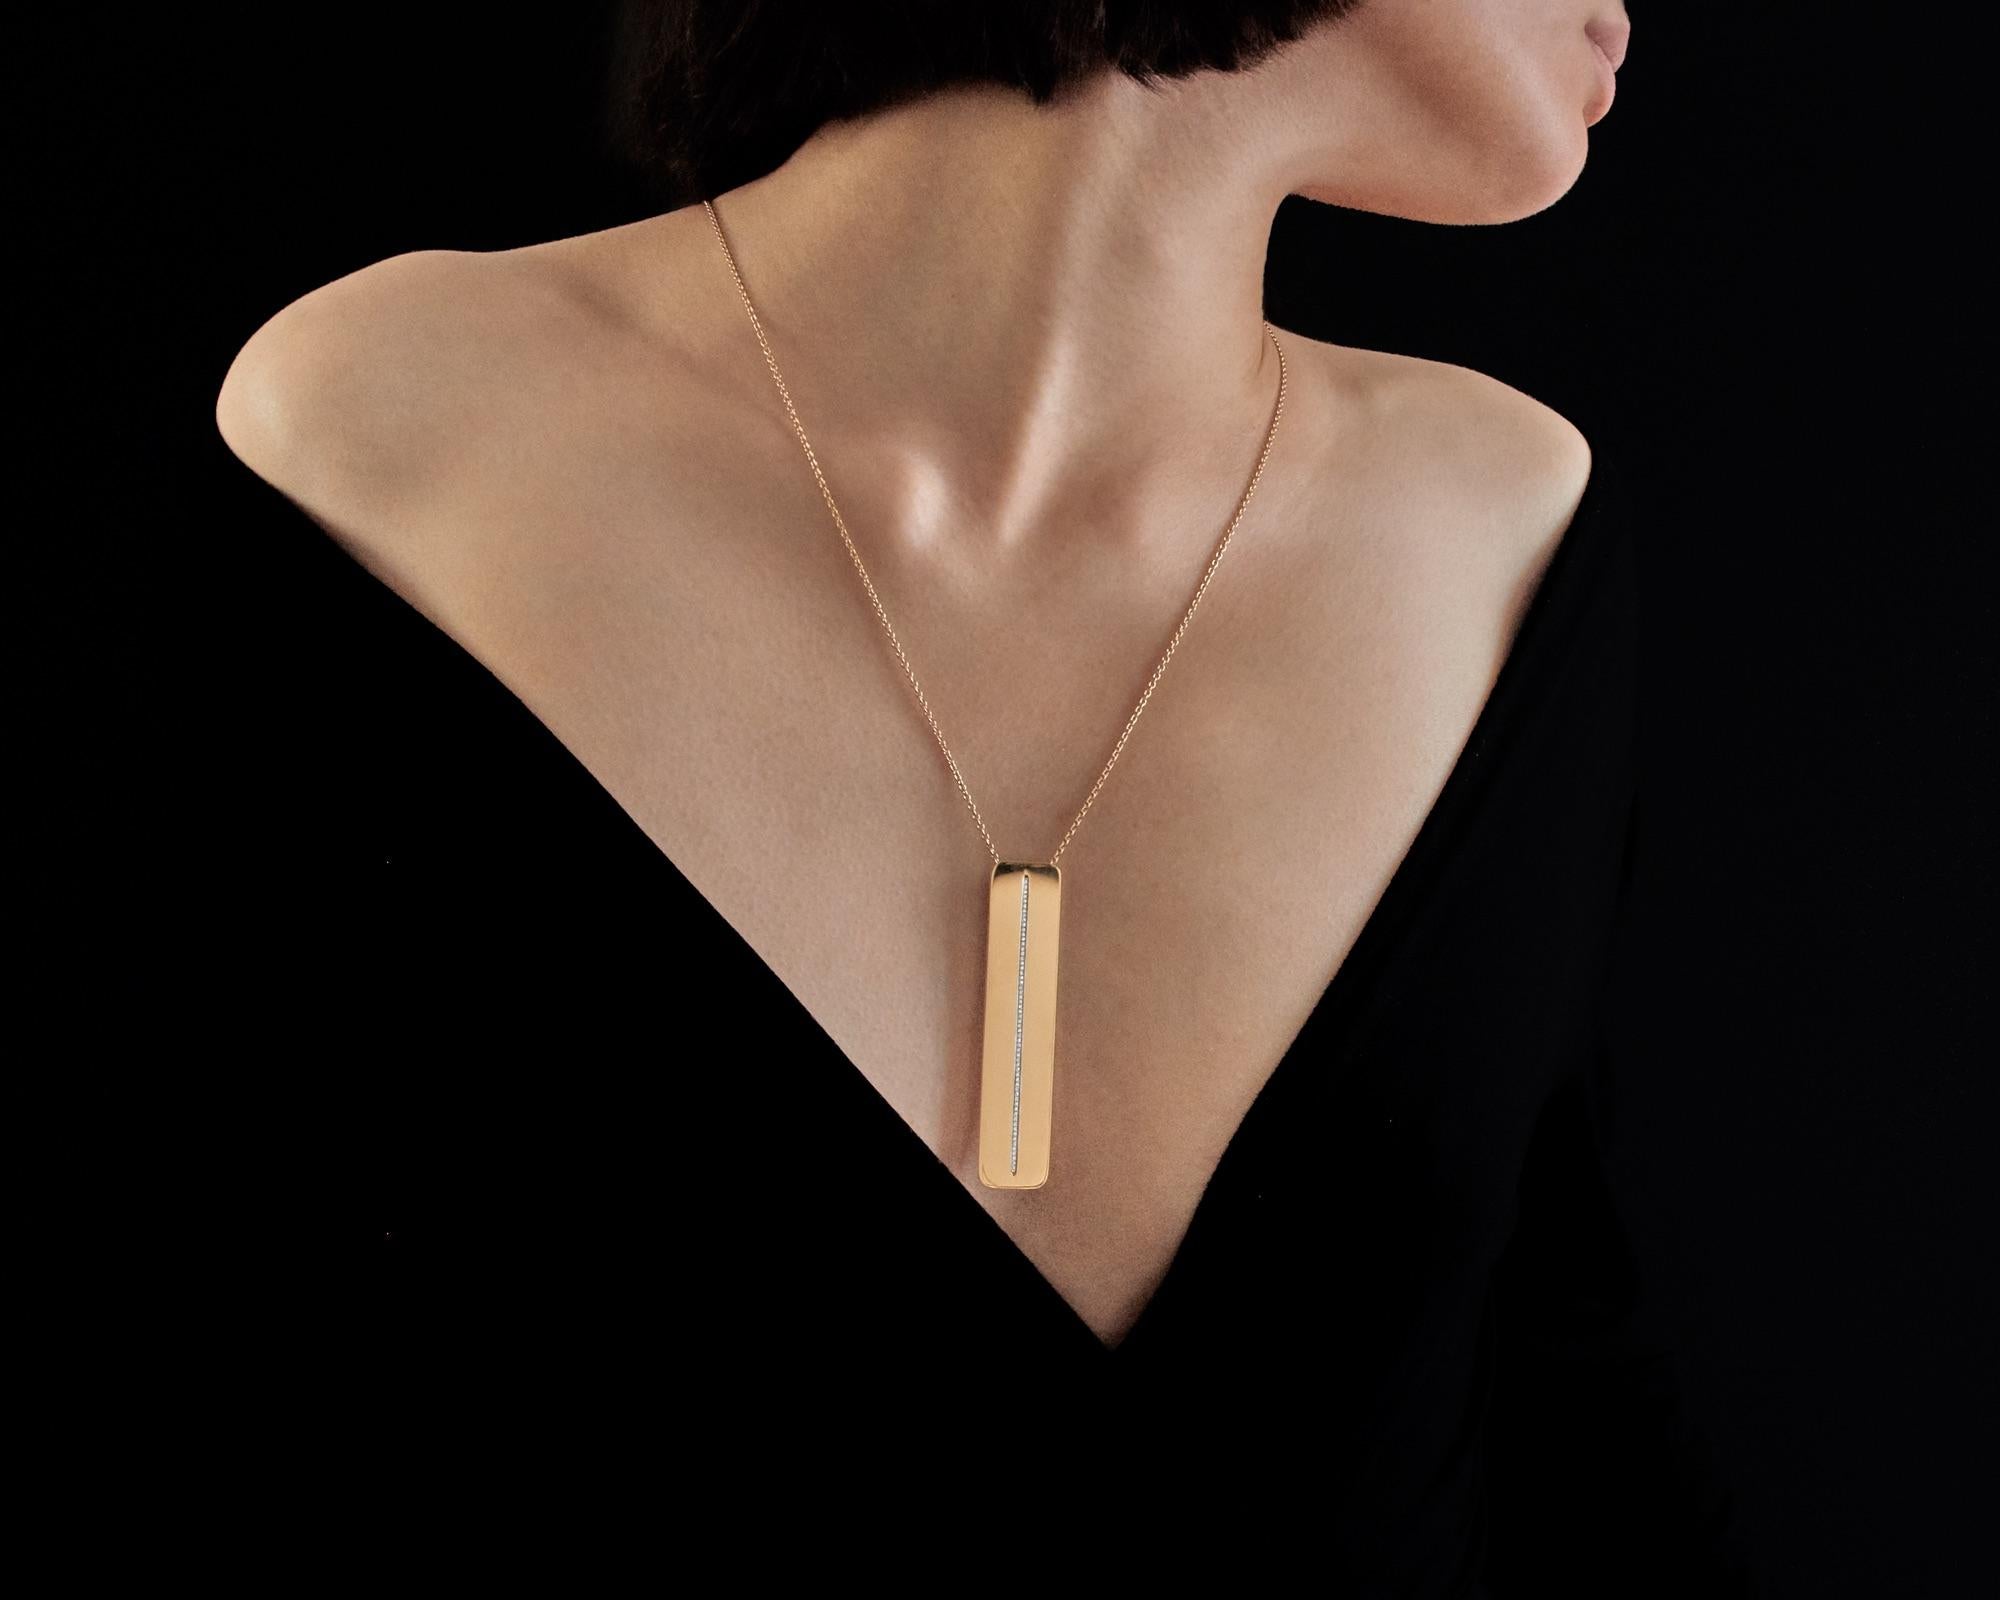 Handcrafted in France in our High Jewelry Paris workshop. Titled  “Gravity” and designed by Édéenne, artist and founder of Maison Édéenne, the truly one-of-a-kind pendant is a 18K yellow gold minimalist plate of 8 cm by 1.7 cm (3.15 by 0.67 inch)